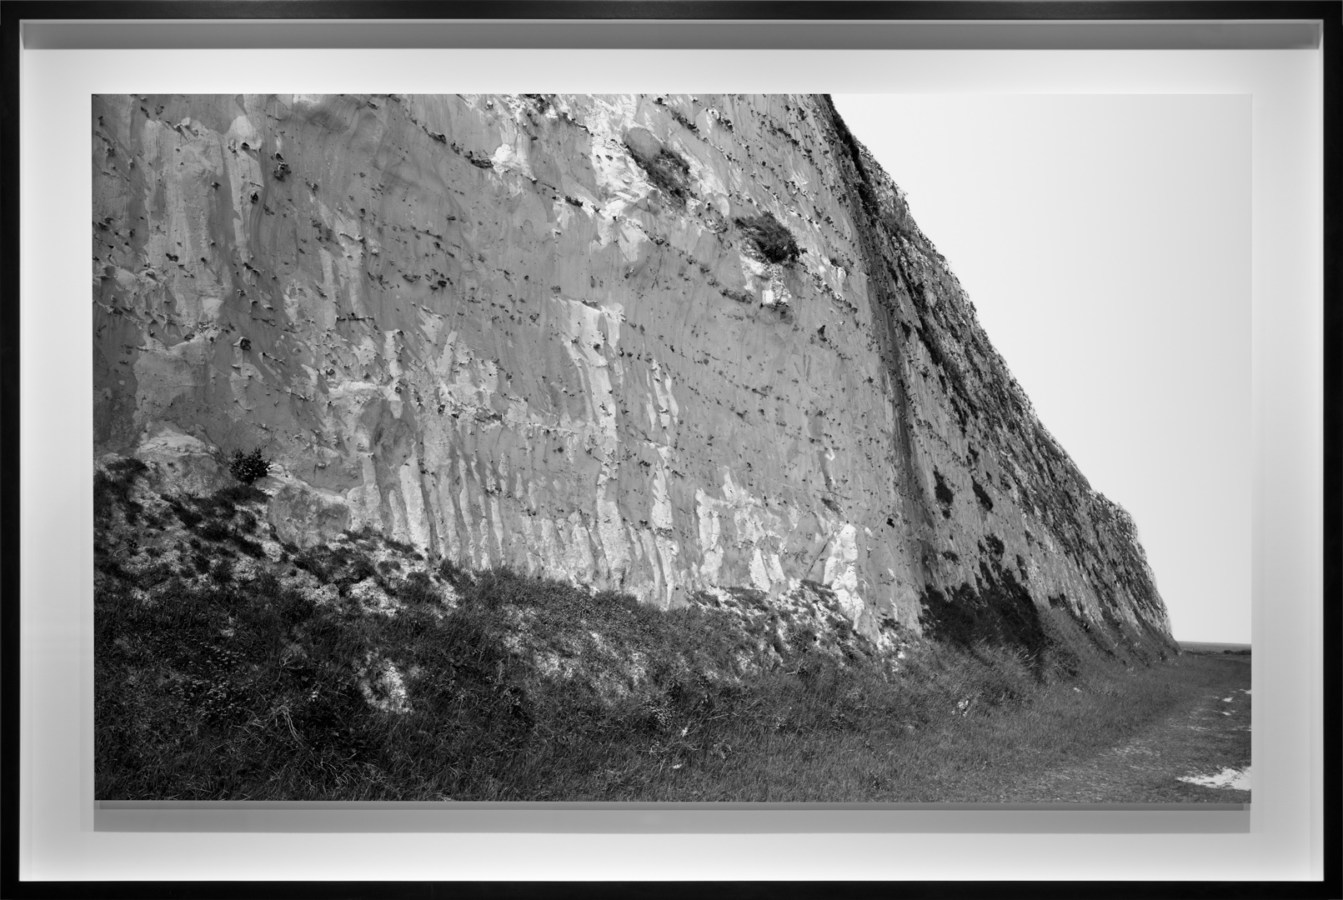 Black-and-white photograph of the base of a bare pale cliff face